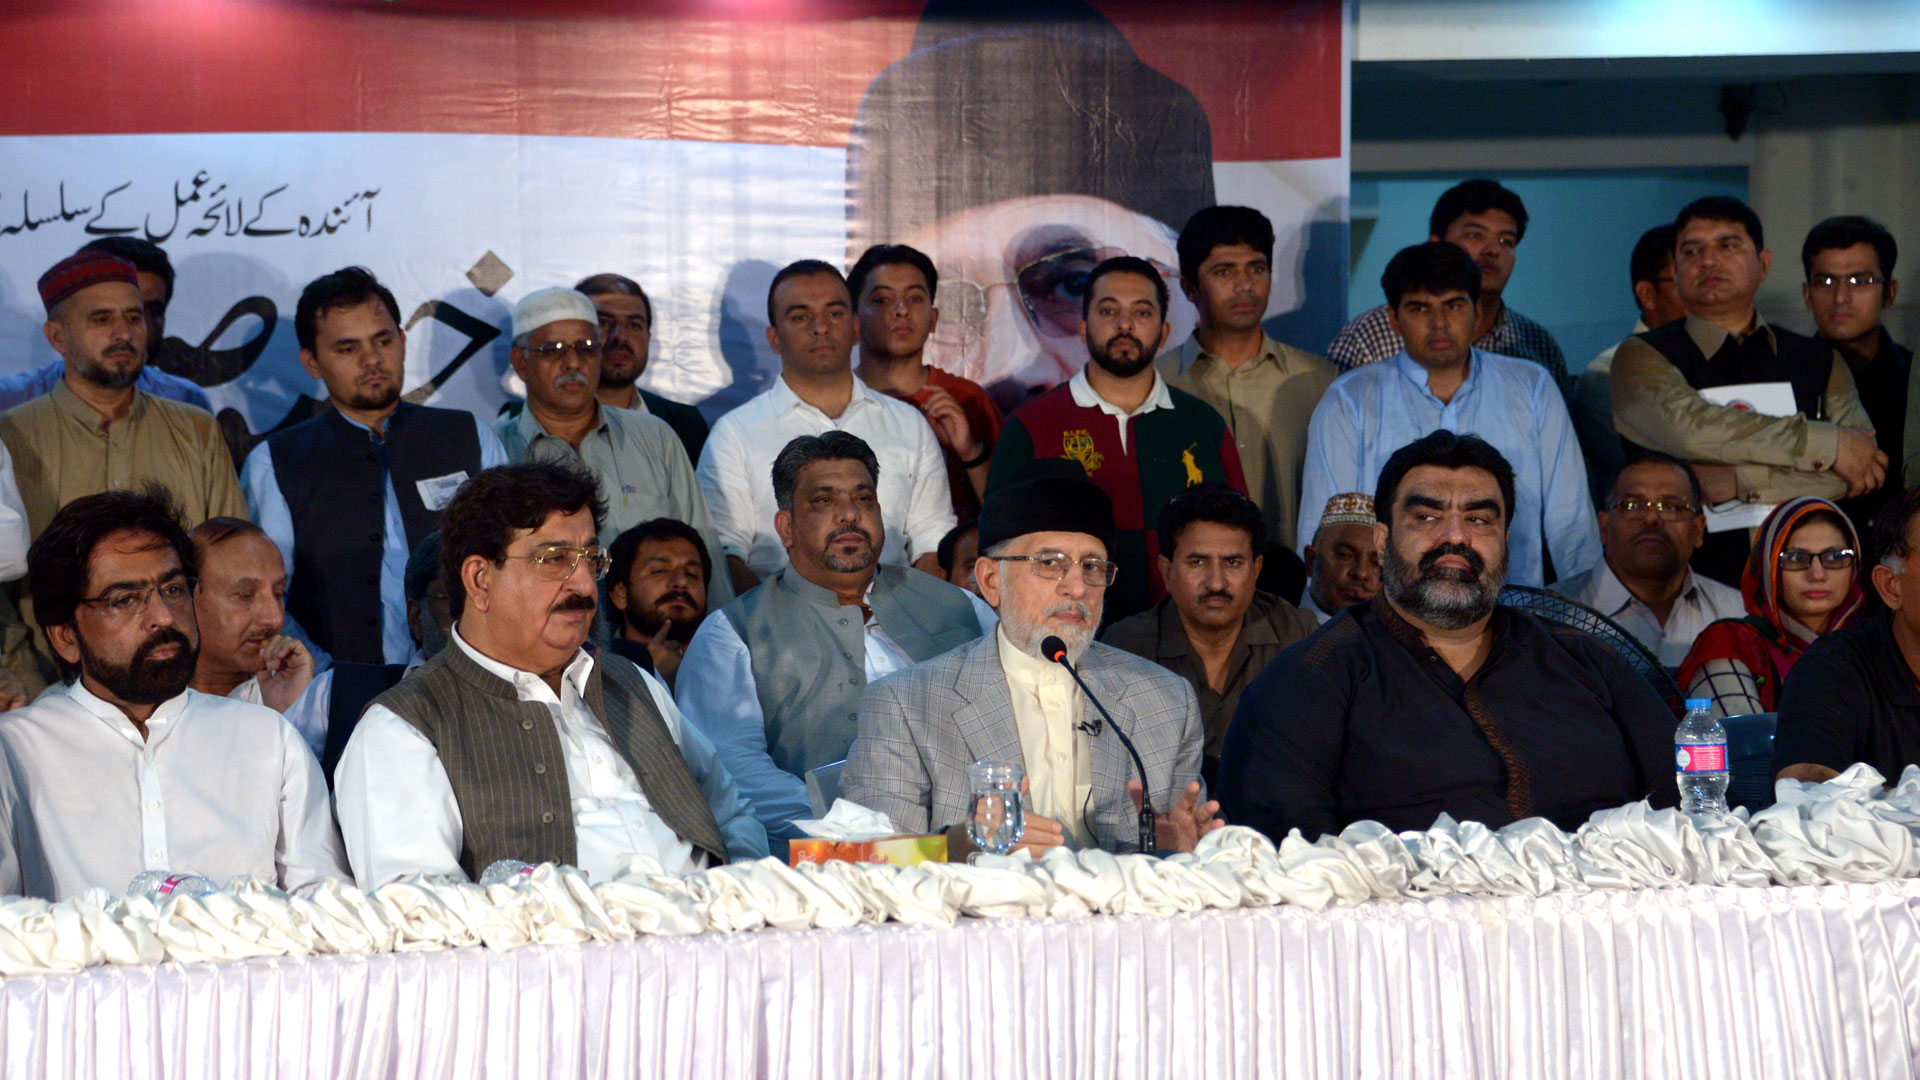 ‘Tehreek-e-Qisas’ to be launched for justice: Dr Tahirul Qadri's press conference